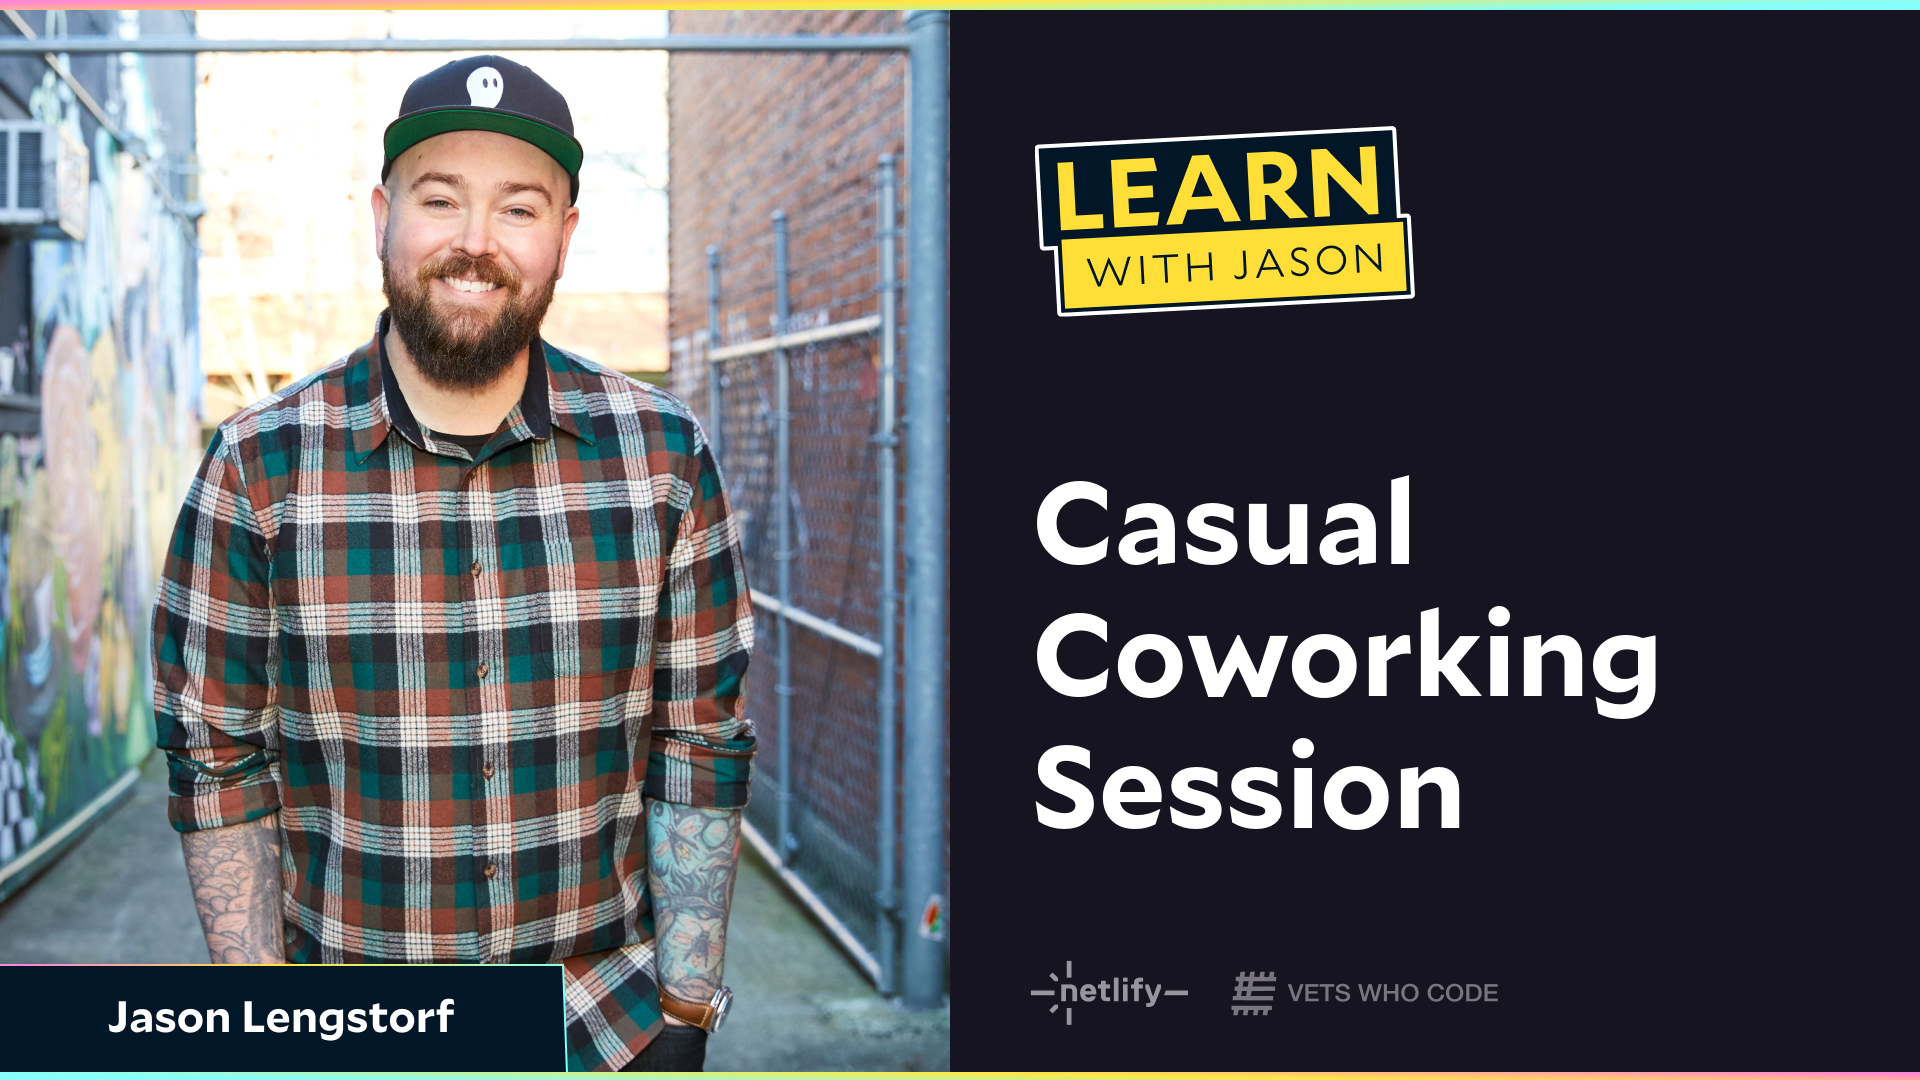 Casual Coworking Session (with Jason Lengstorf)